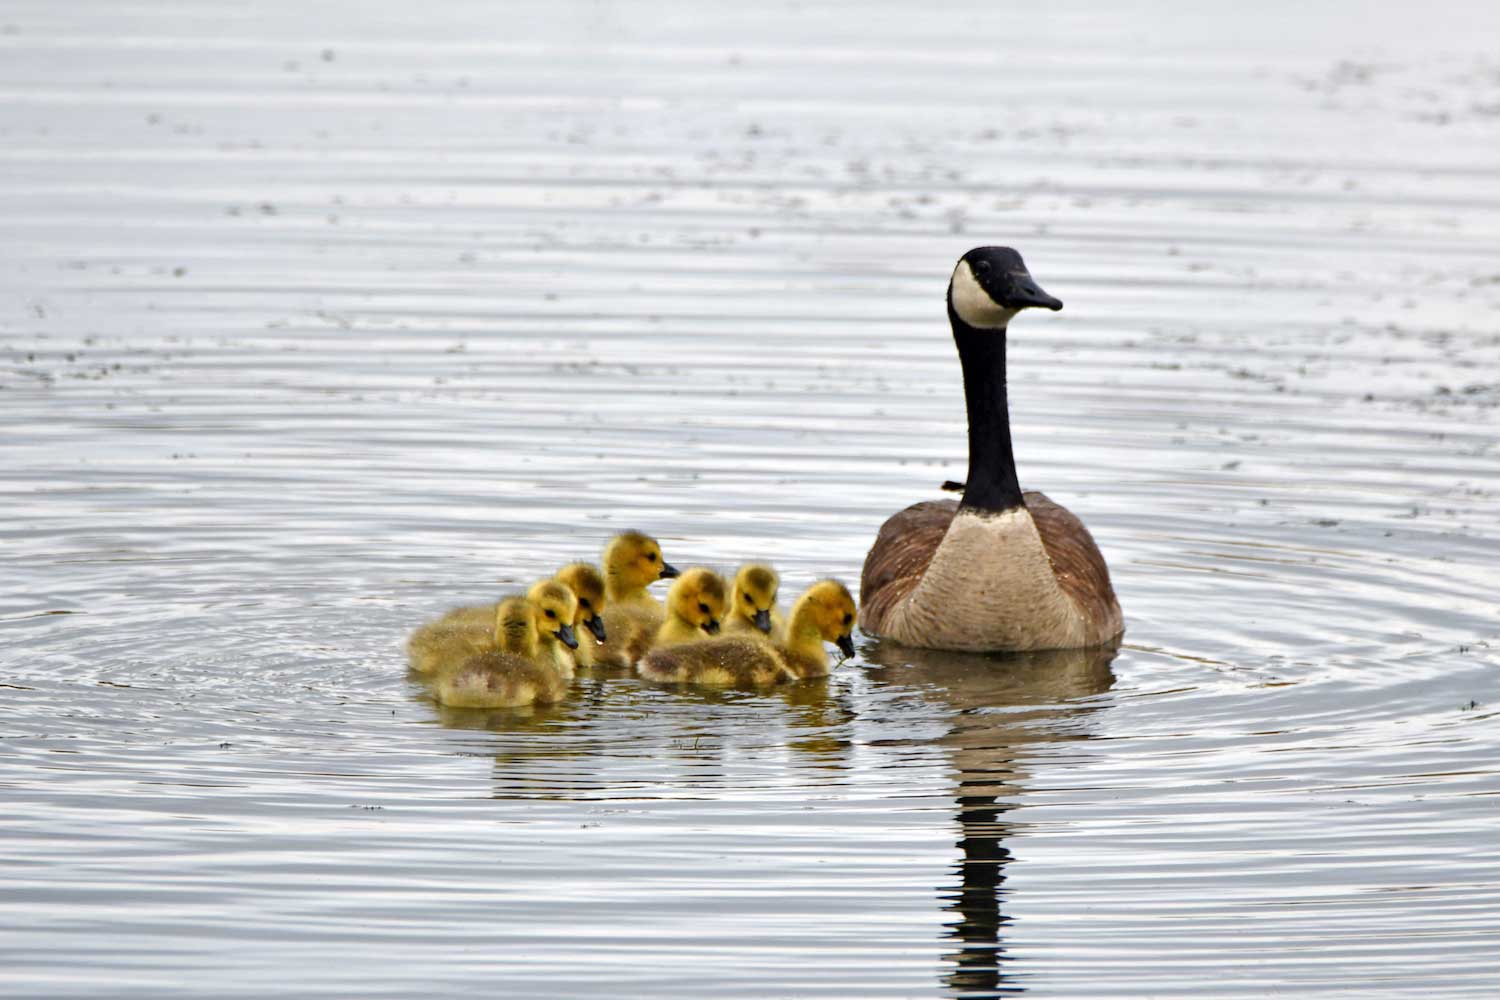 A Canada goose and goslings in the water.